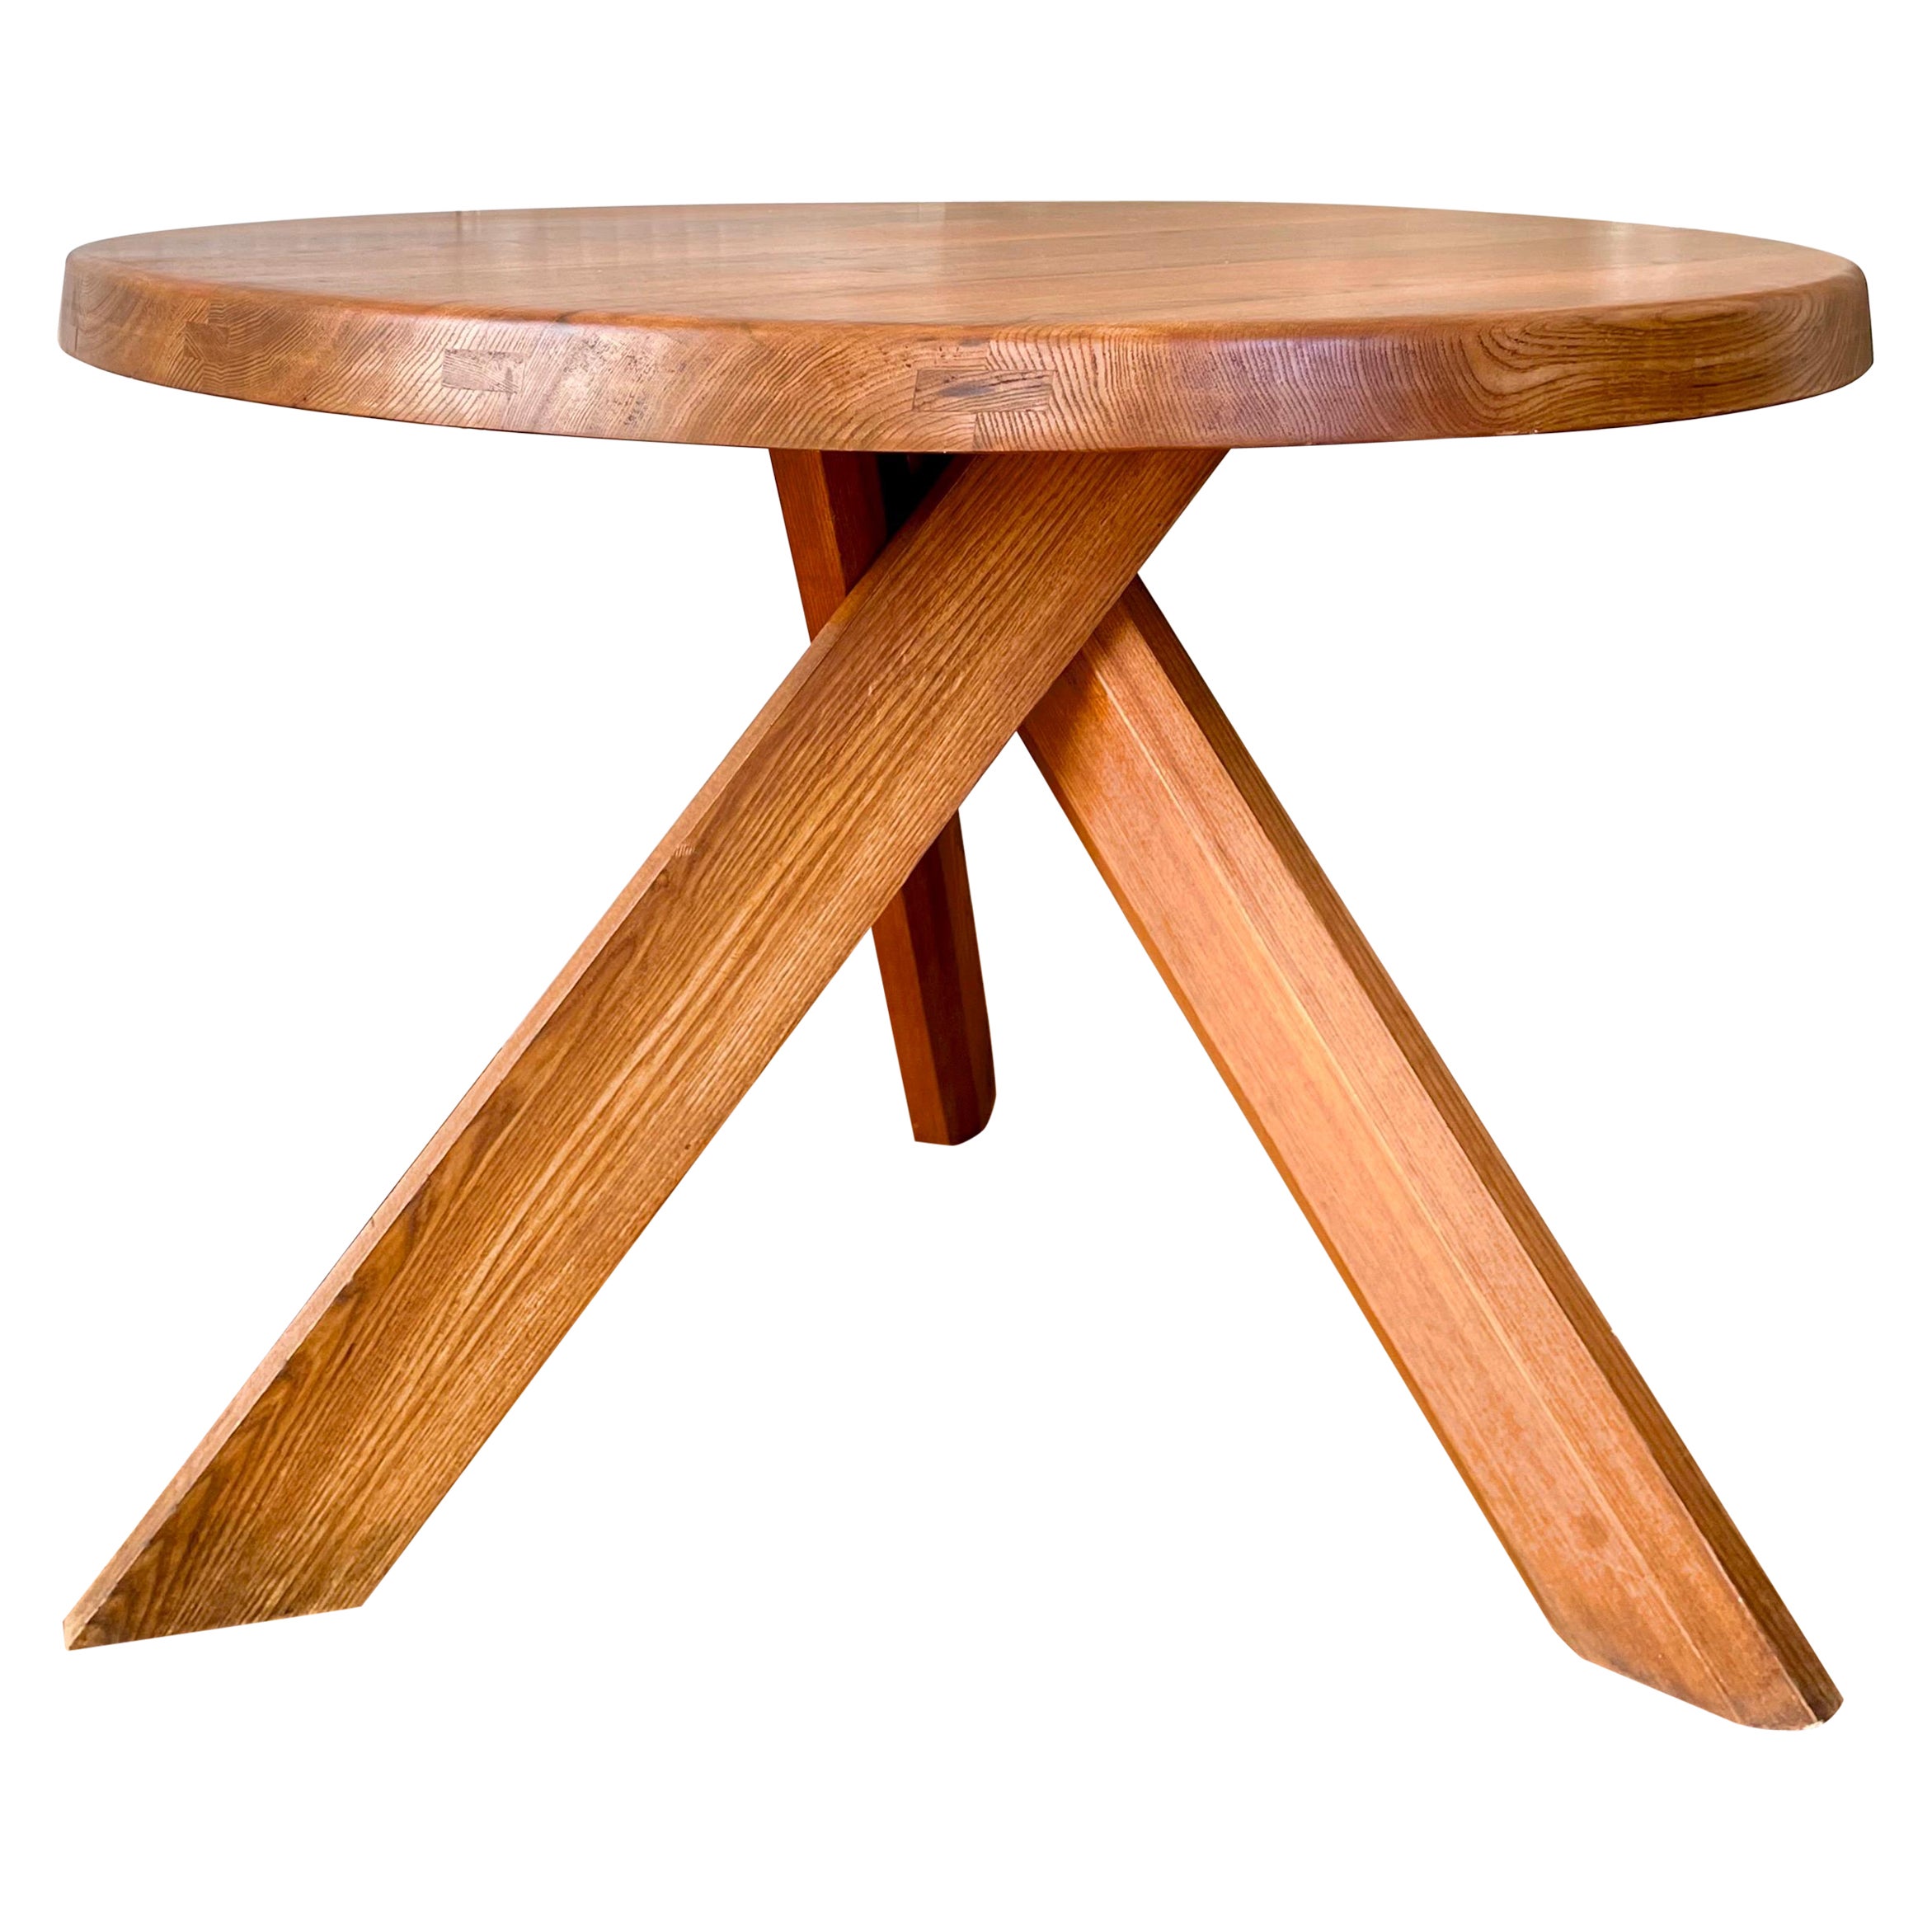 Table T 21 a by Pierre Chapo from 1978 in French Elm